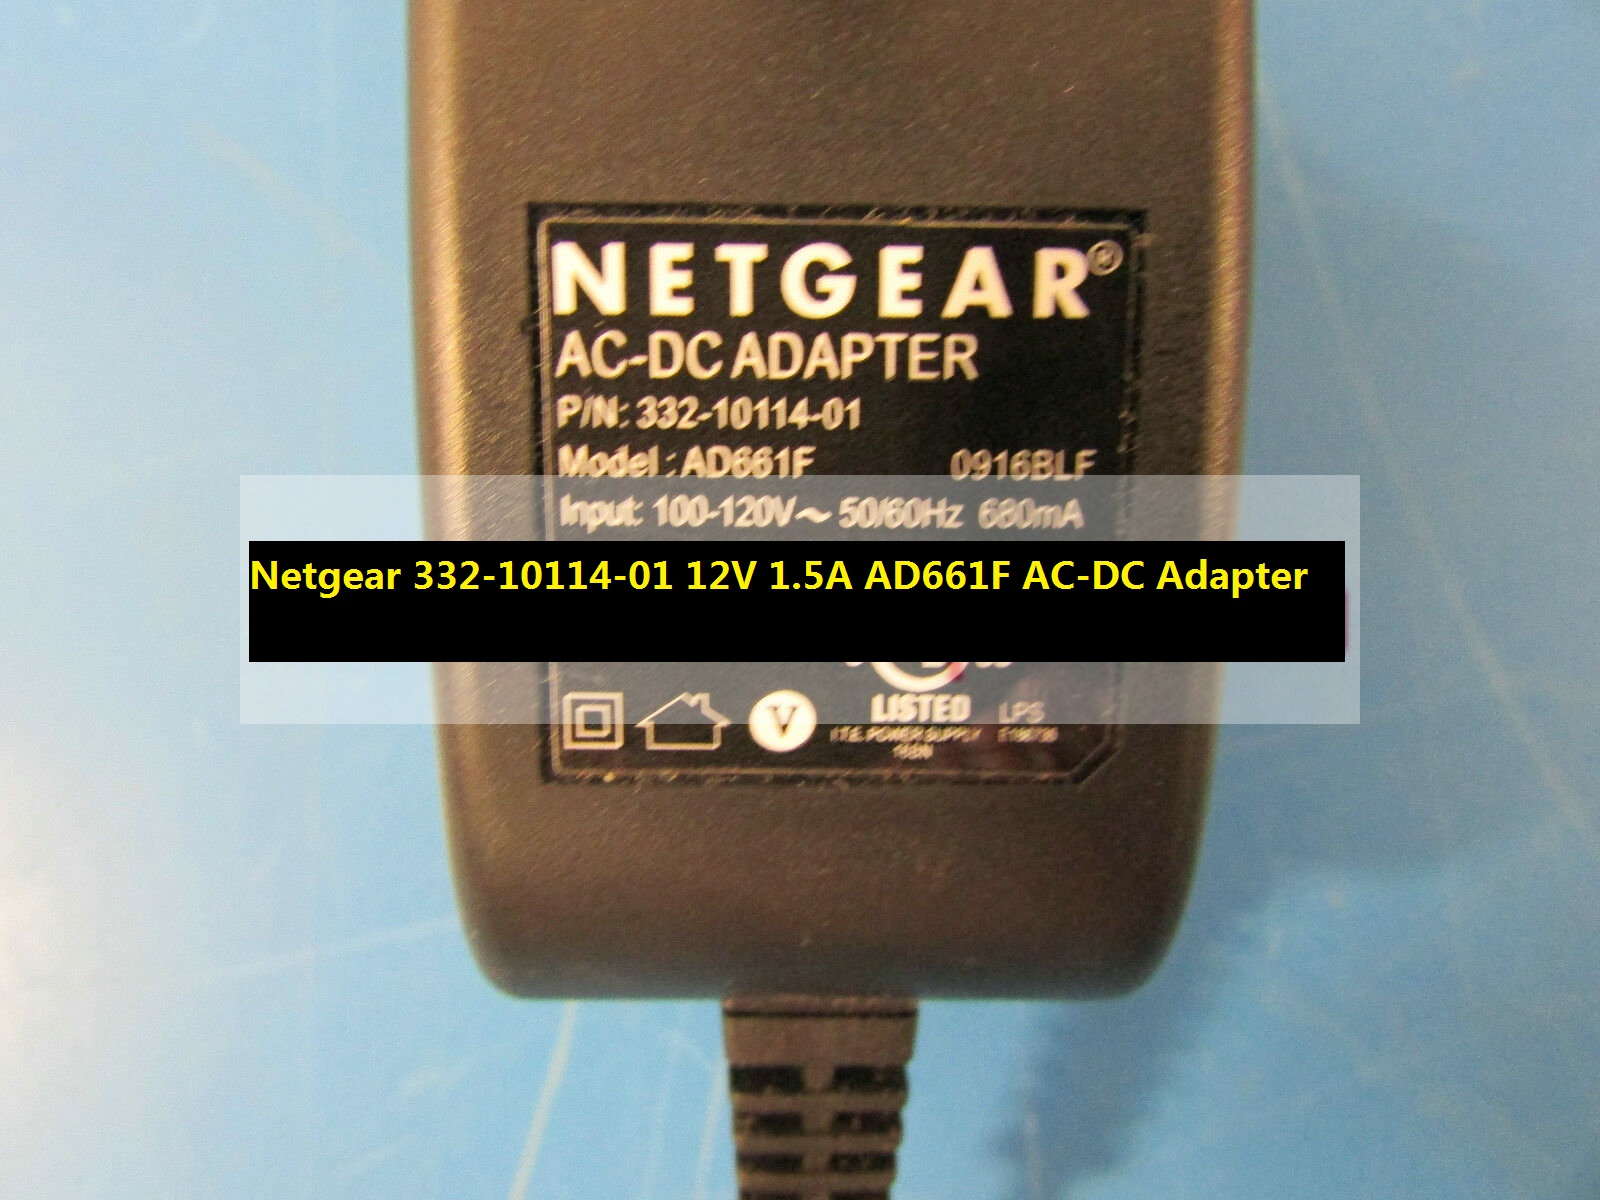 NEW Netgear 332-10114-01 12V 1.5A AD661F AC-DC Adapter Router Charger - Click Image to Close